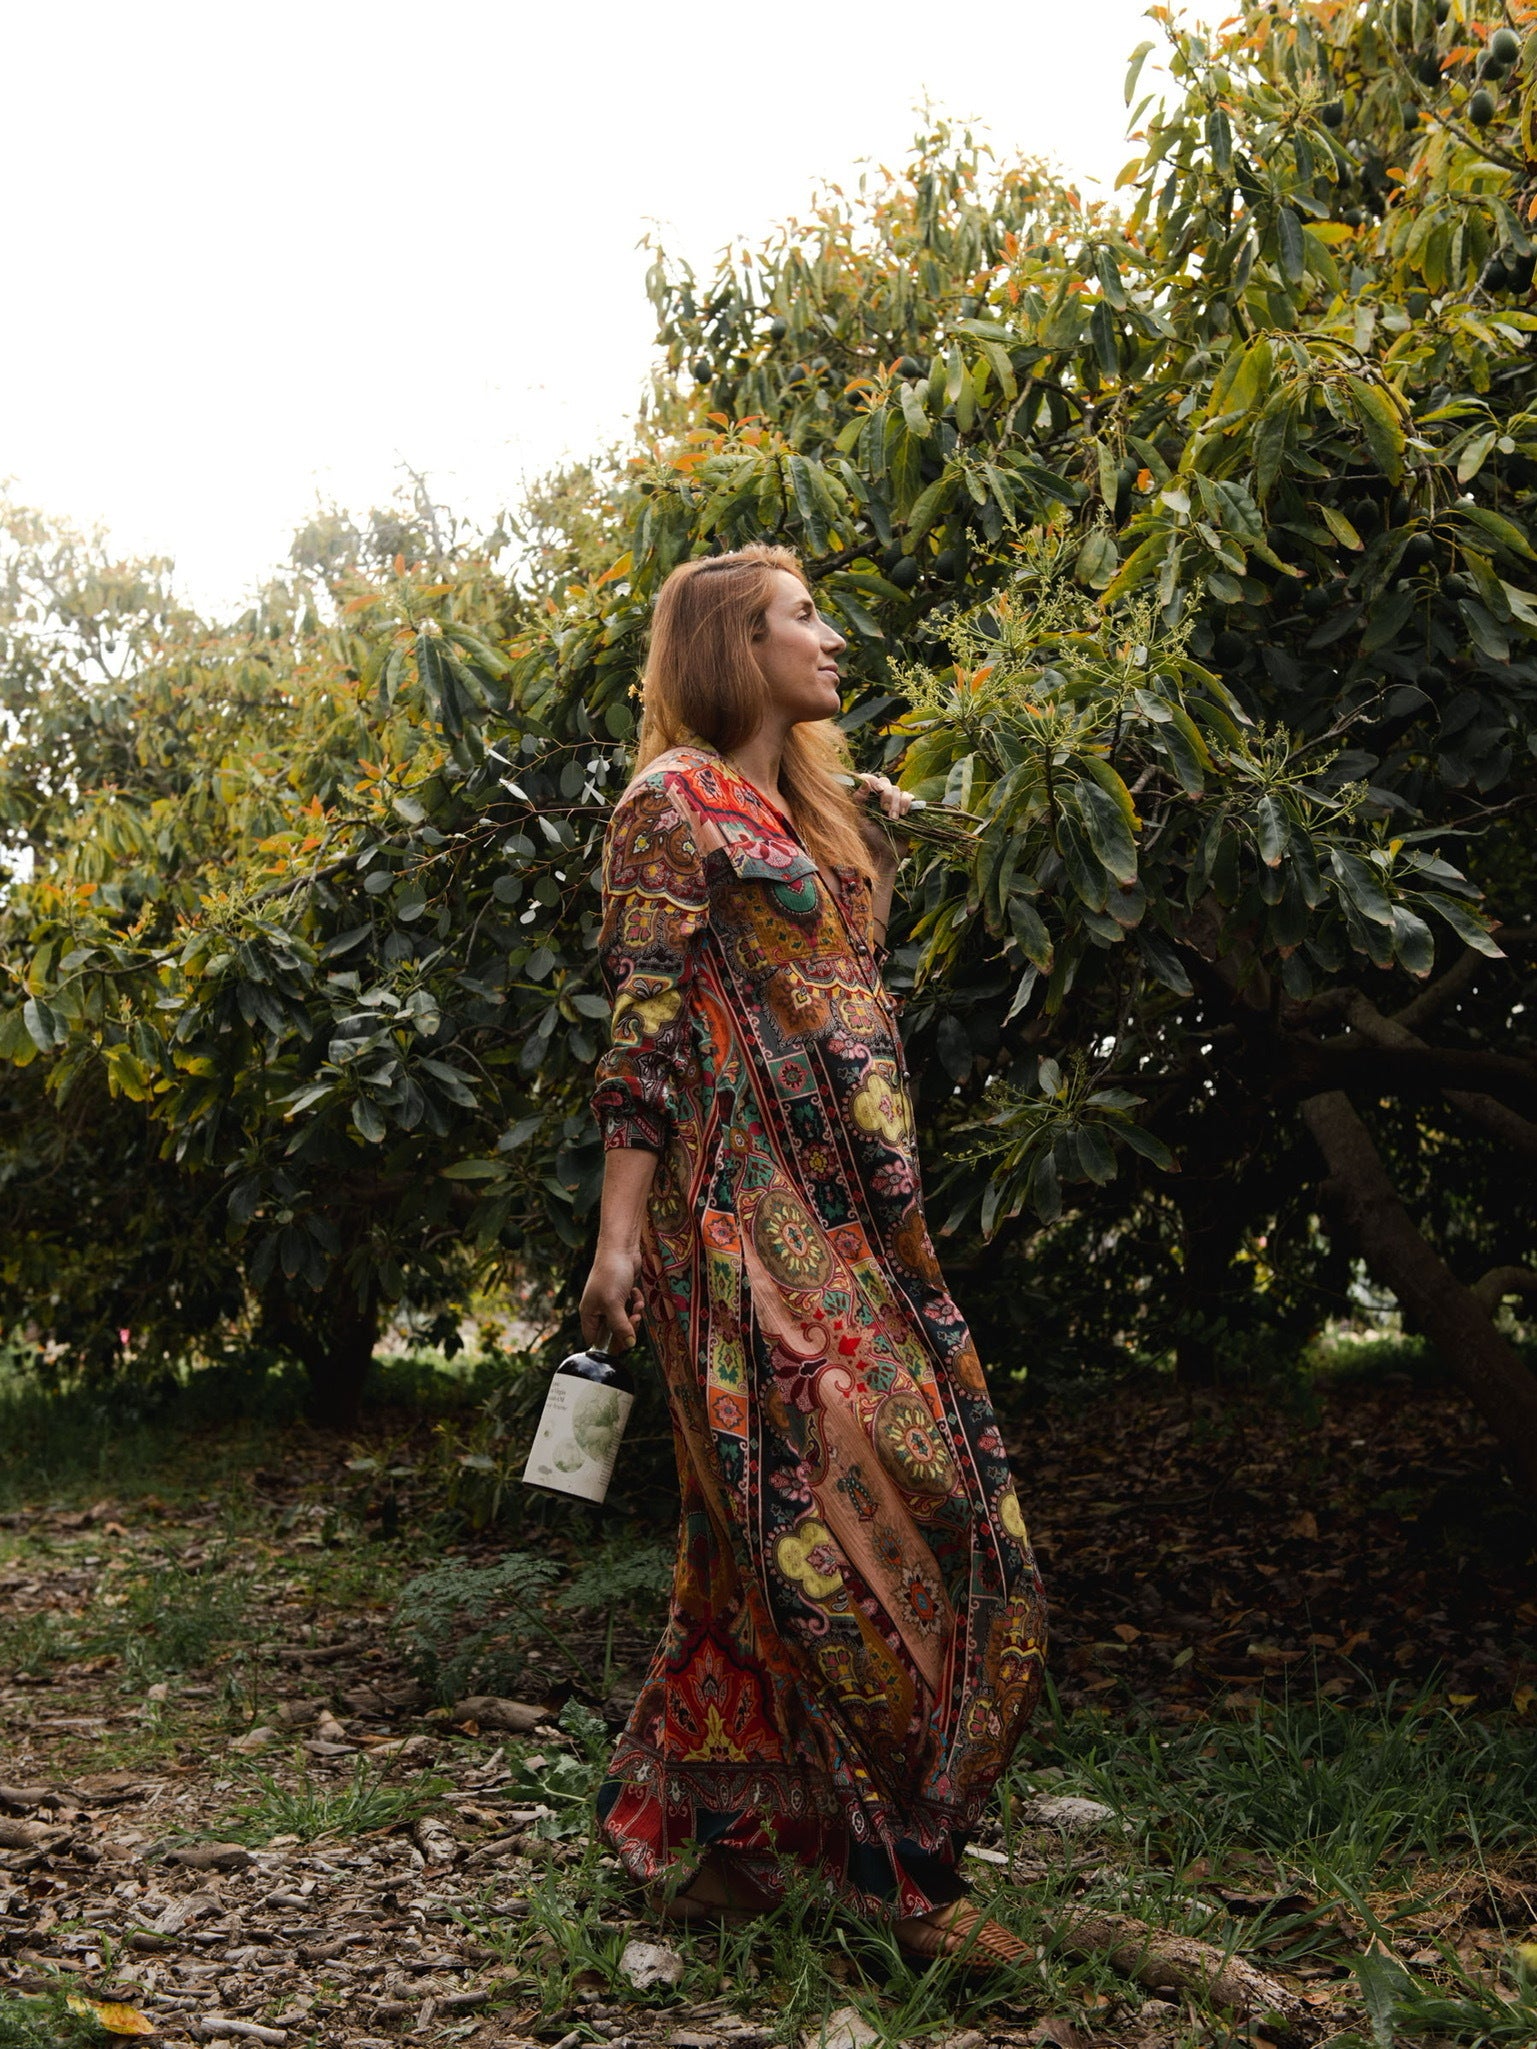 A woman in a long dress walking through an orchard, surrounded by blooming avocado trees.